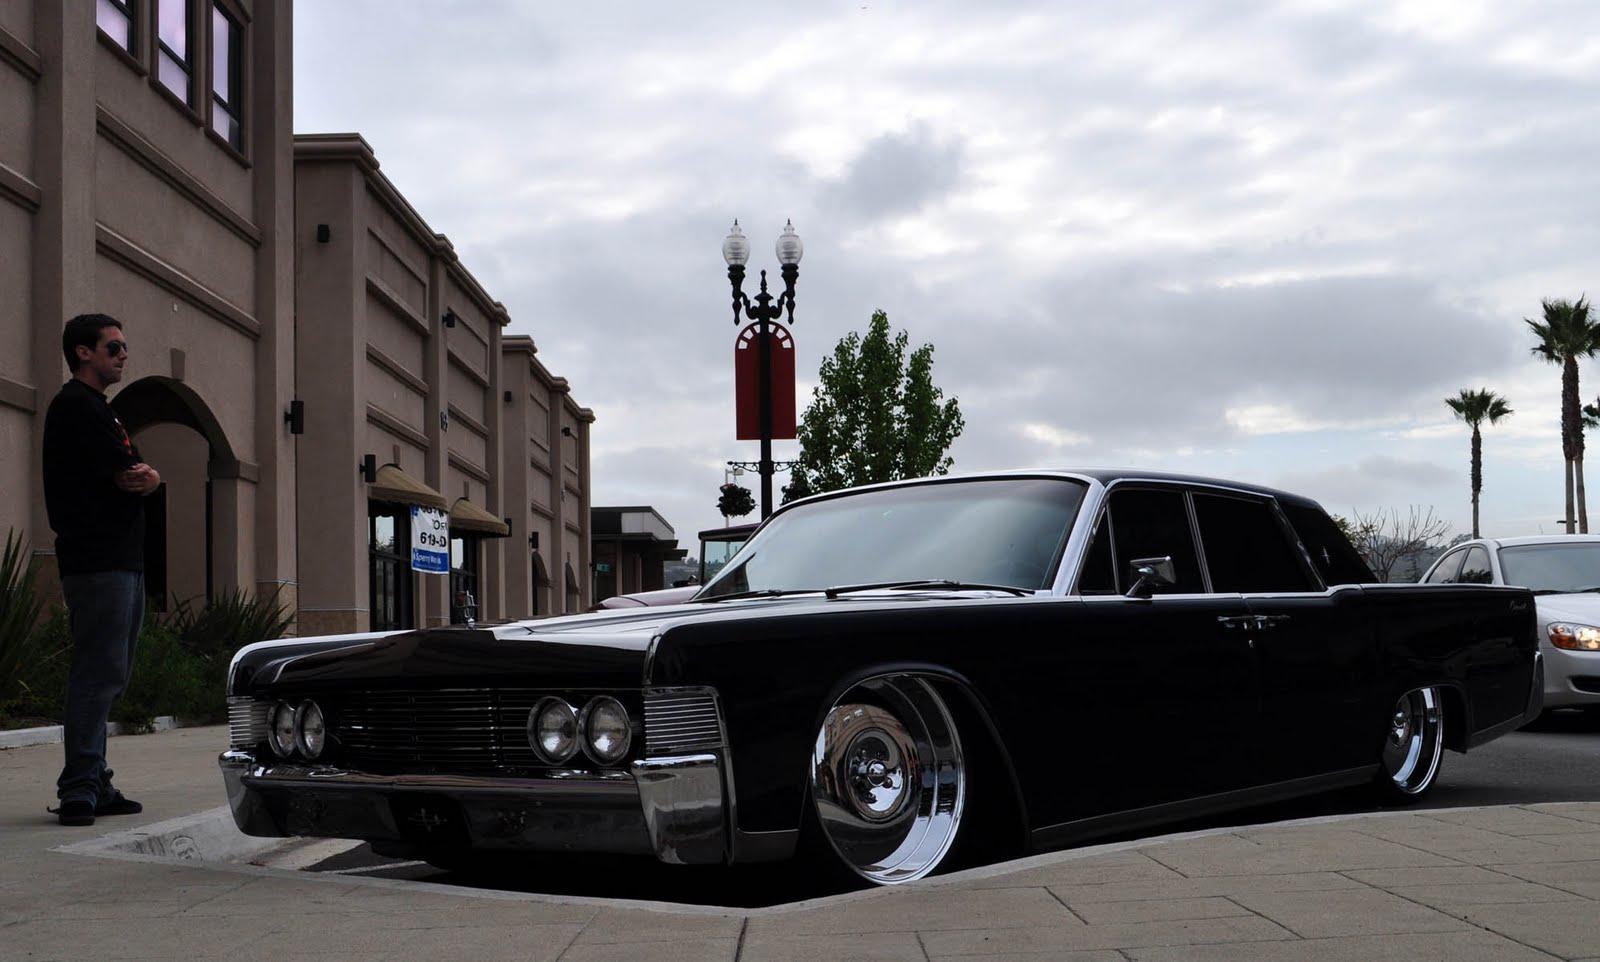 Lowrider Wallpapers Iphone - Wallpaper Cave 571